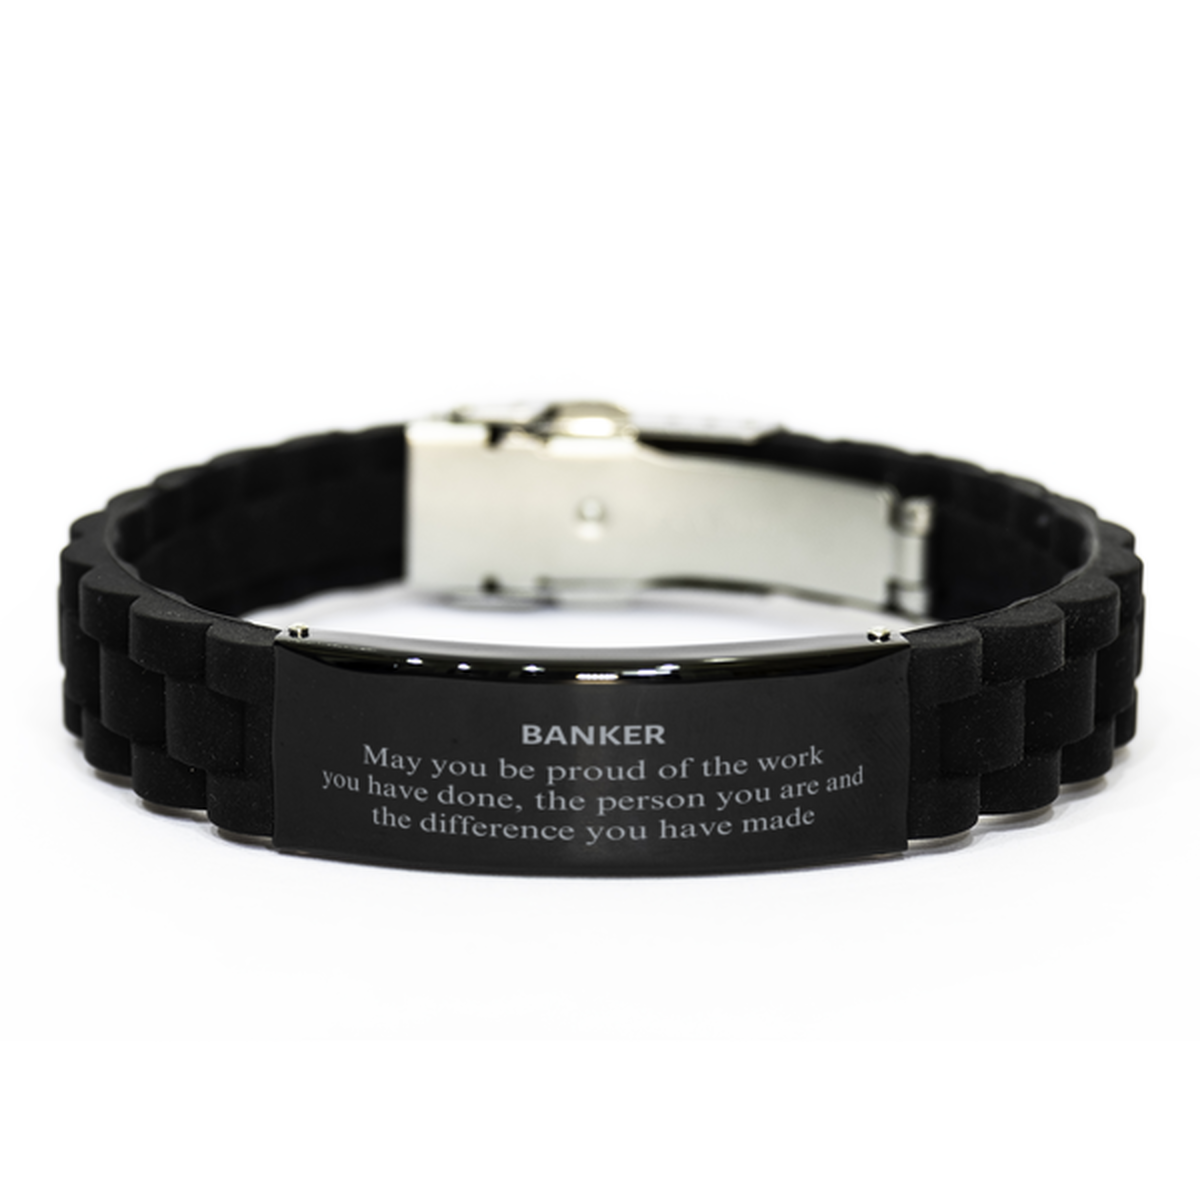 Banker May you be proud of the work you have done, Retirement Banker Black Glidelock Clasp Bracelet for Colleague Appreciation Gifts Amazing for Banker